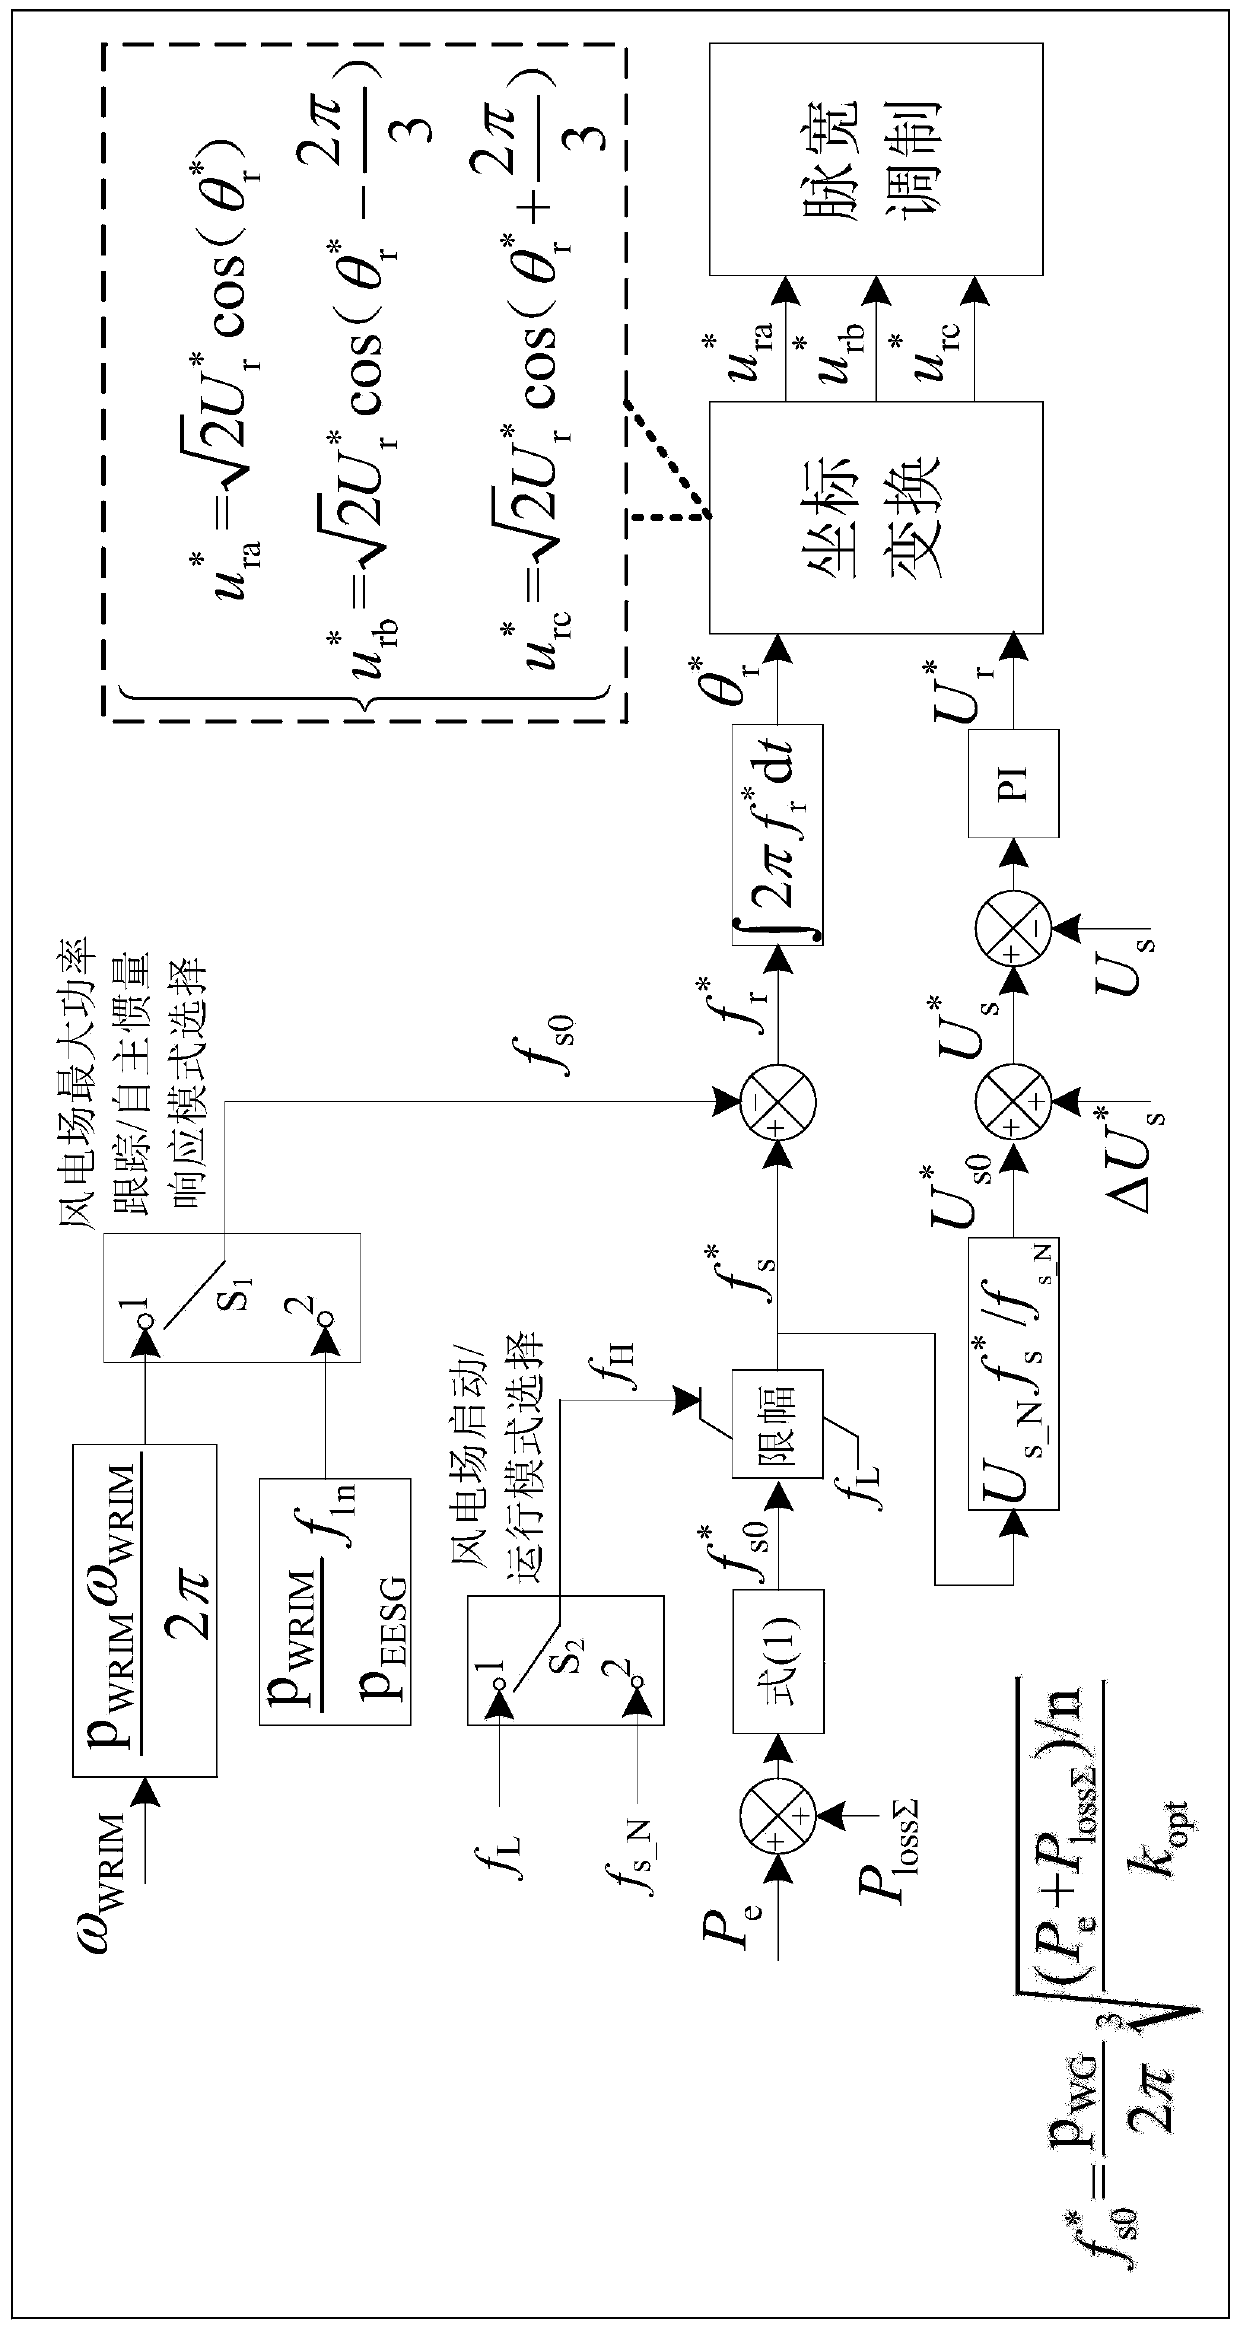 Dynamic frequency division wind power generation system with autonomous inertia response